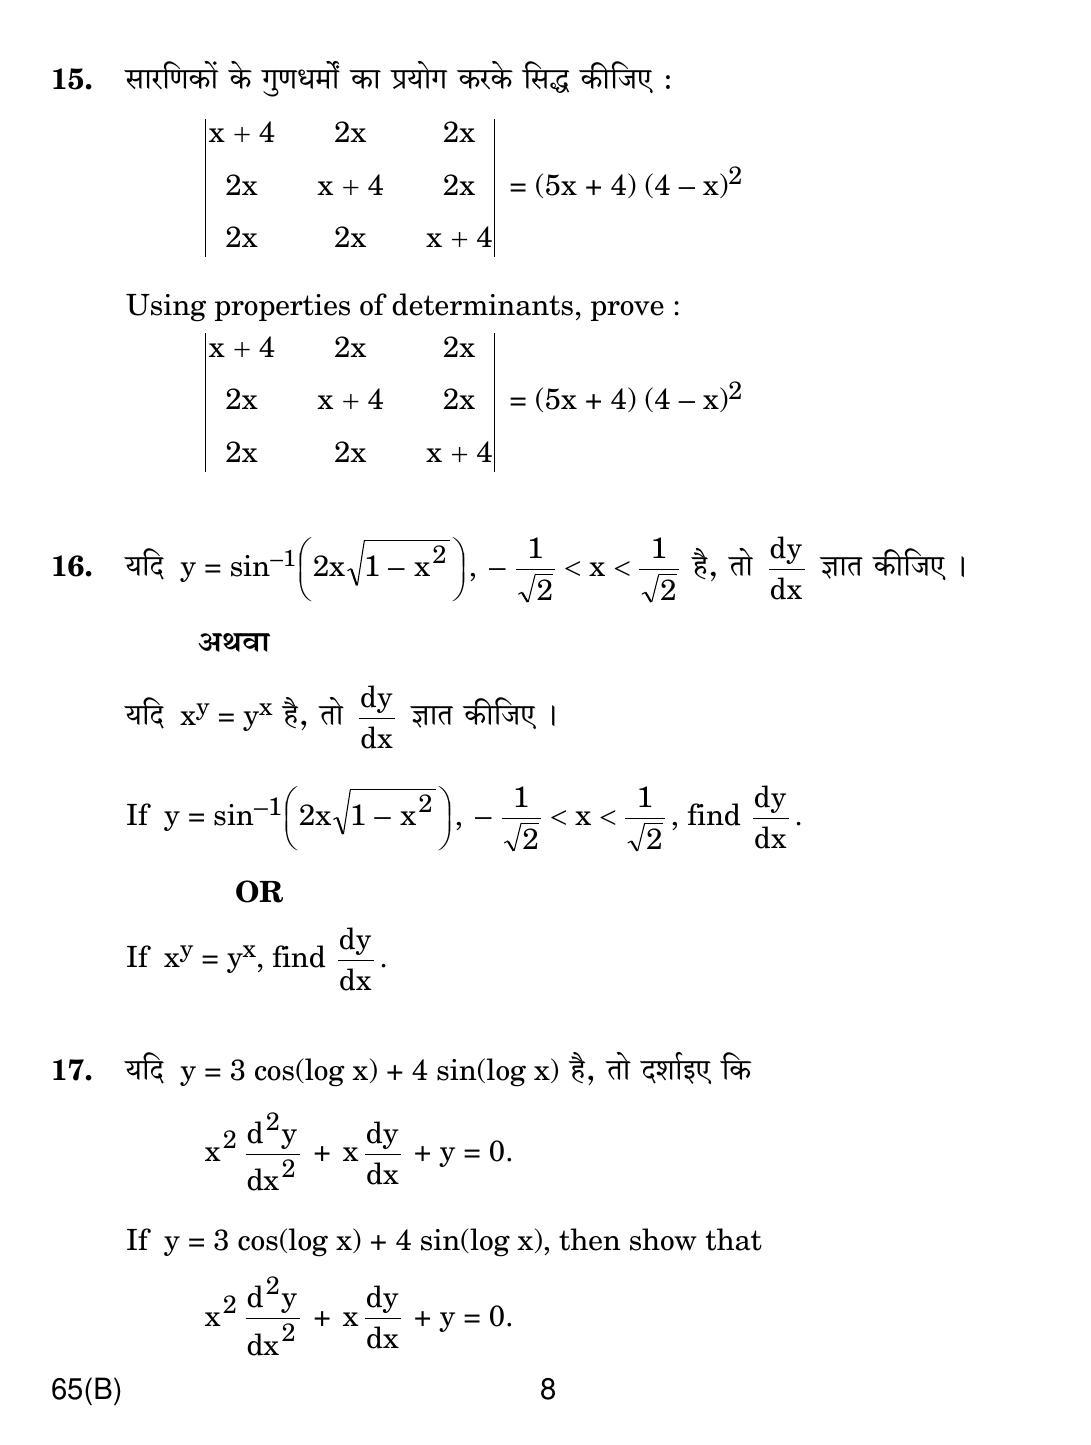 CBSE Class 12 65(B) MATHS For Blind Candidates 2019 Compartment Question Paper - Page 8